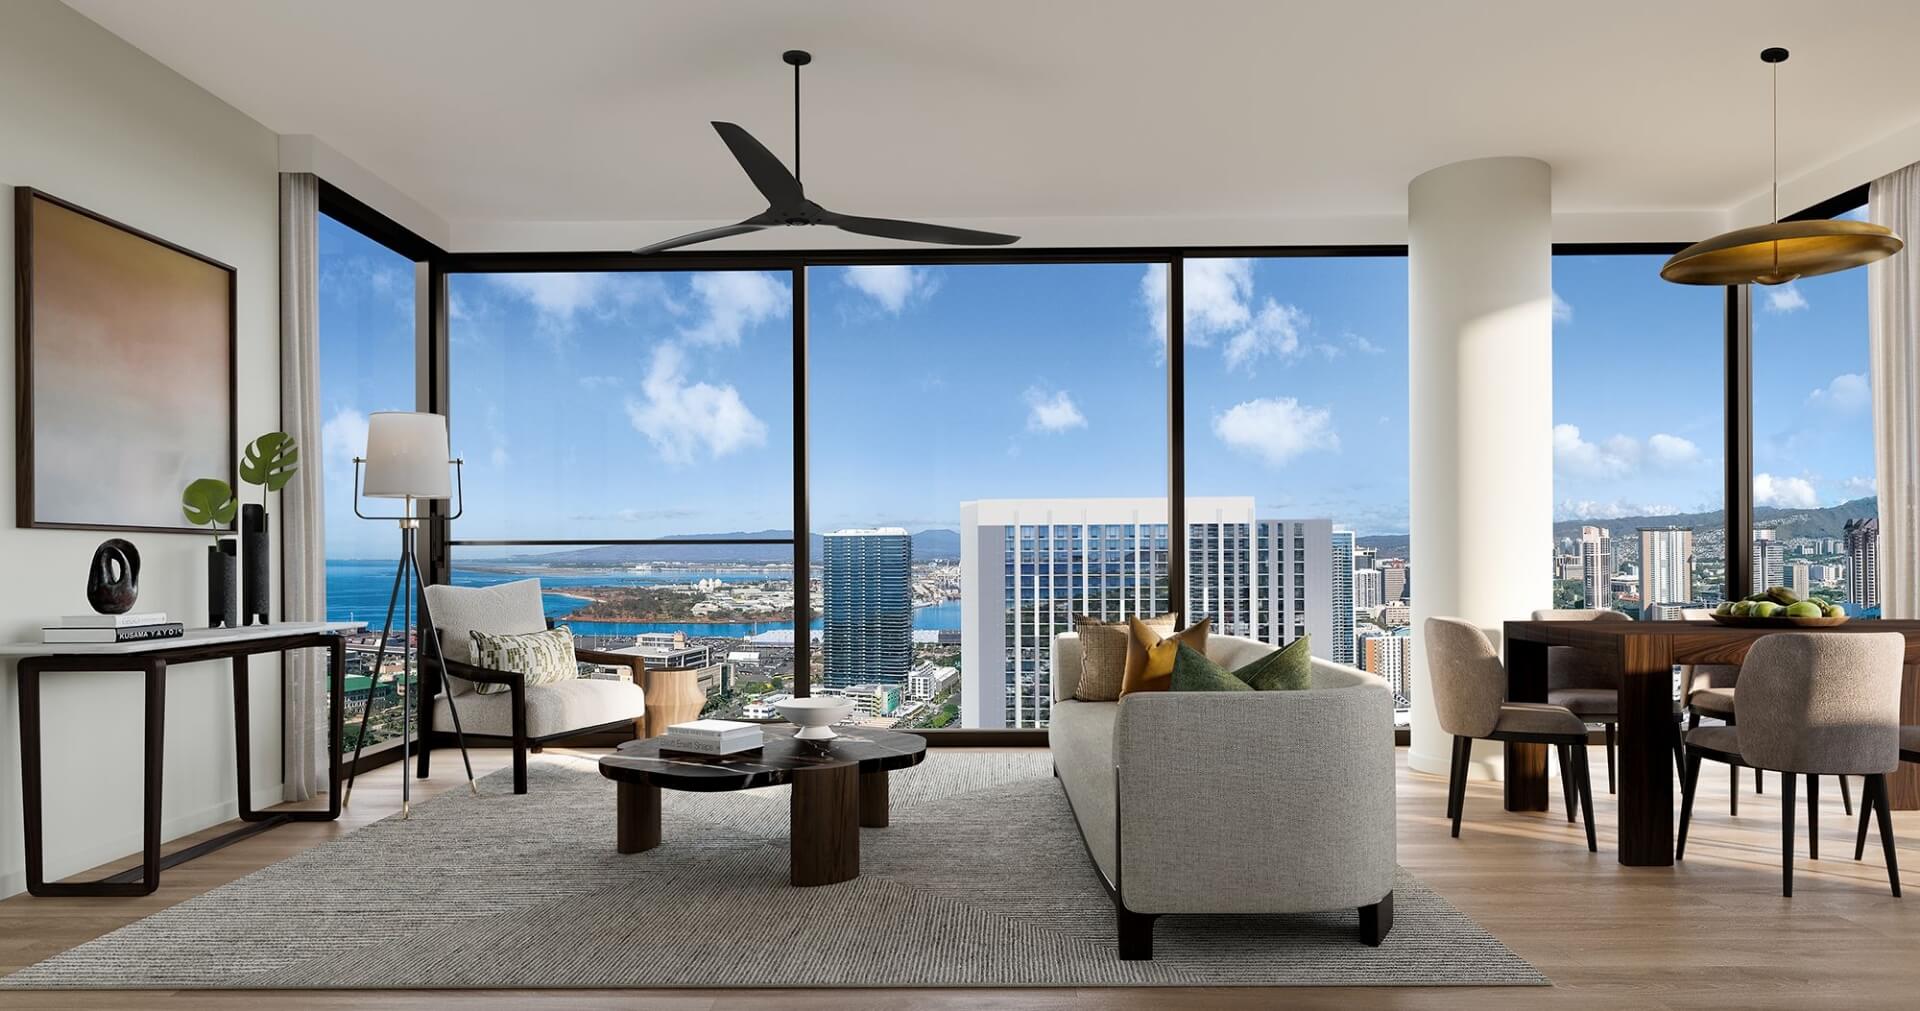 Kalae two bedroom Residence 09 Living Room with westward views of Honolulu and the South Shore coastline.